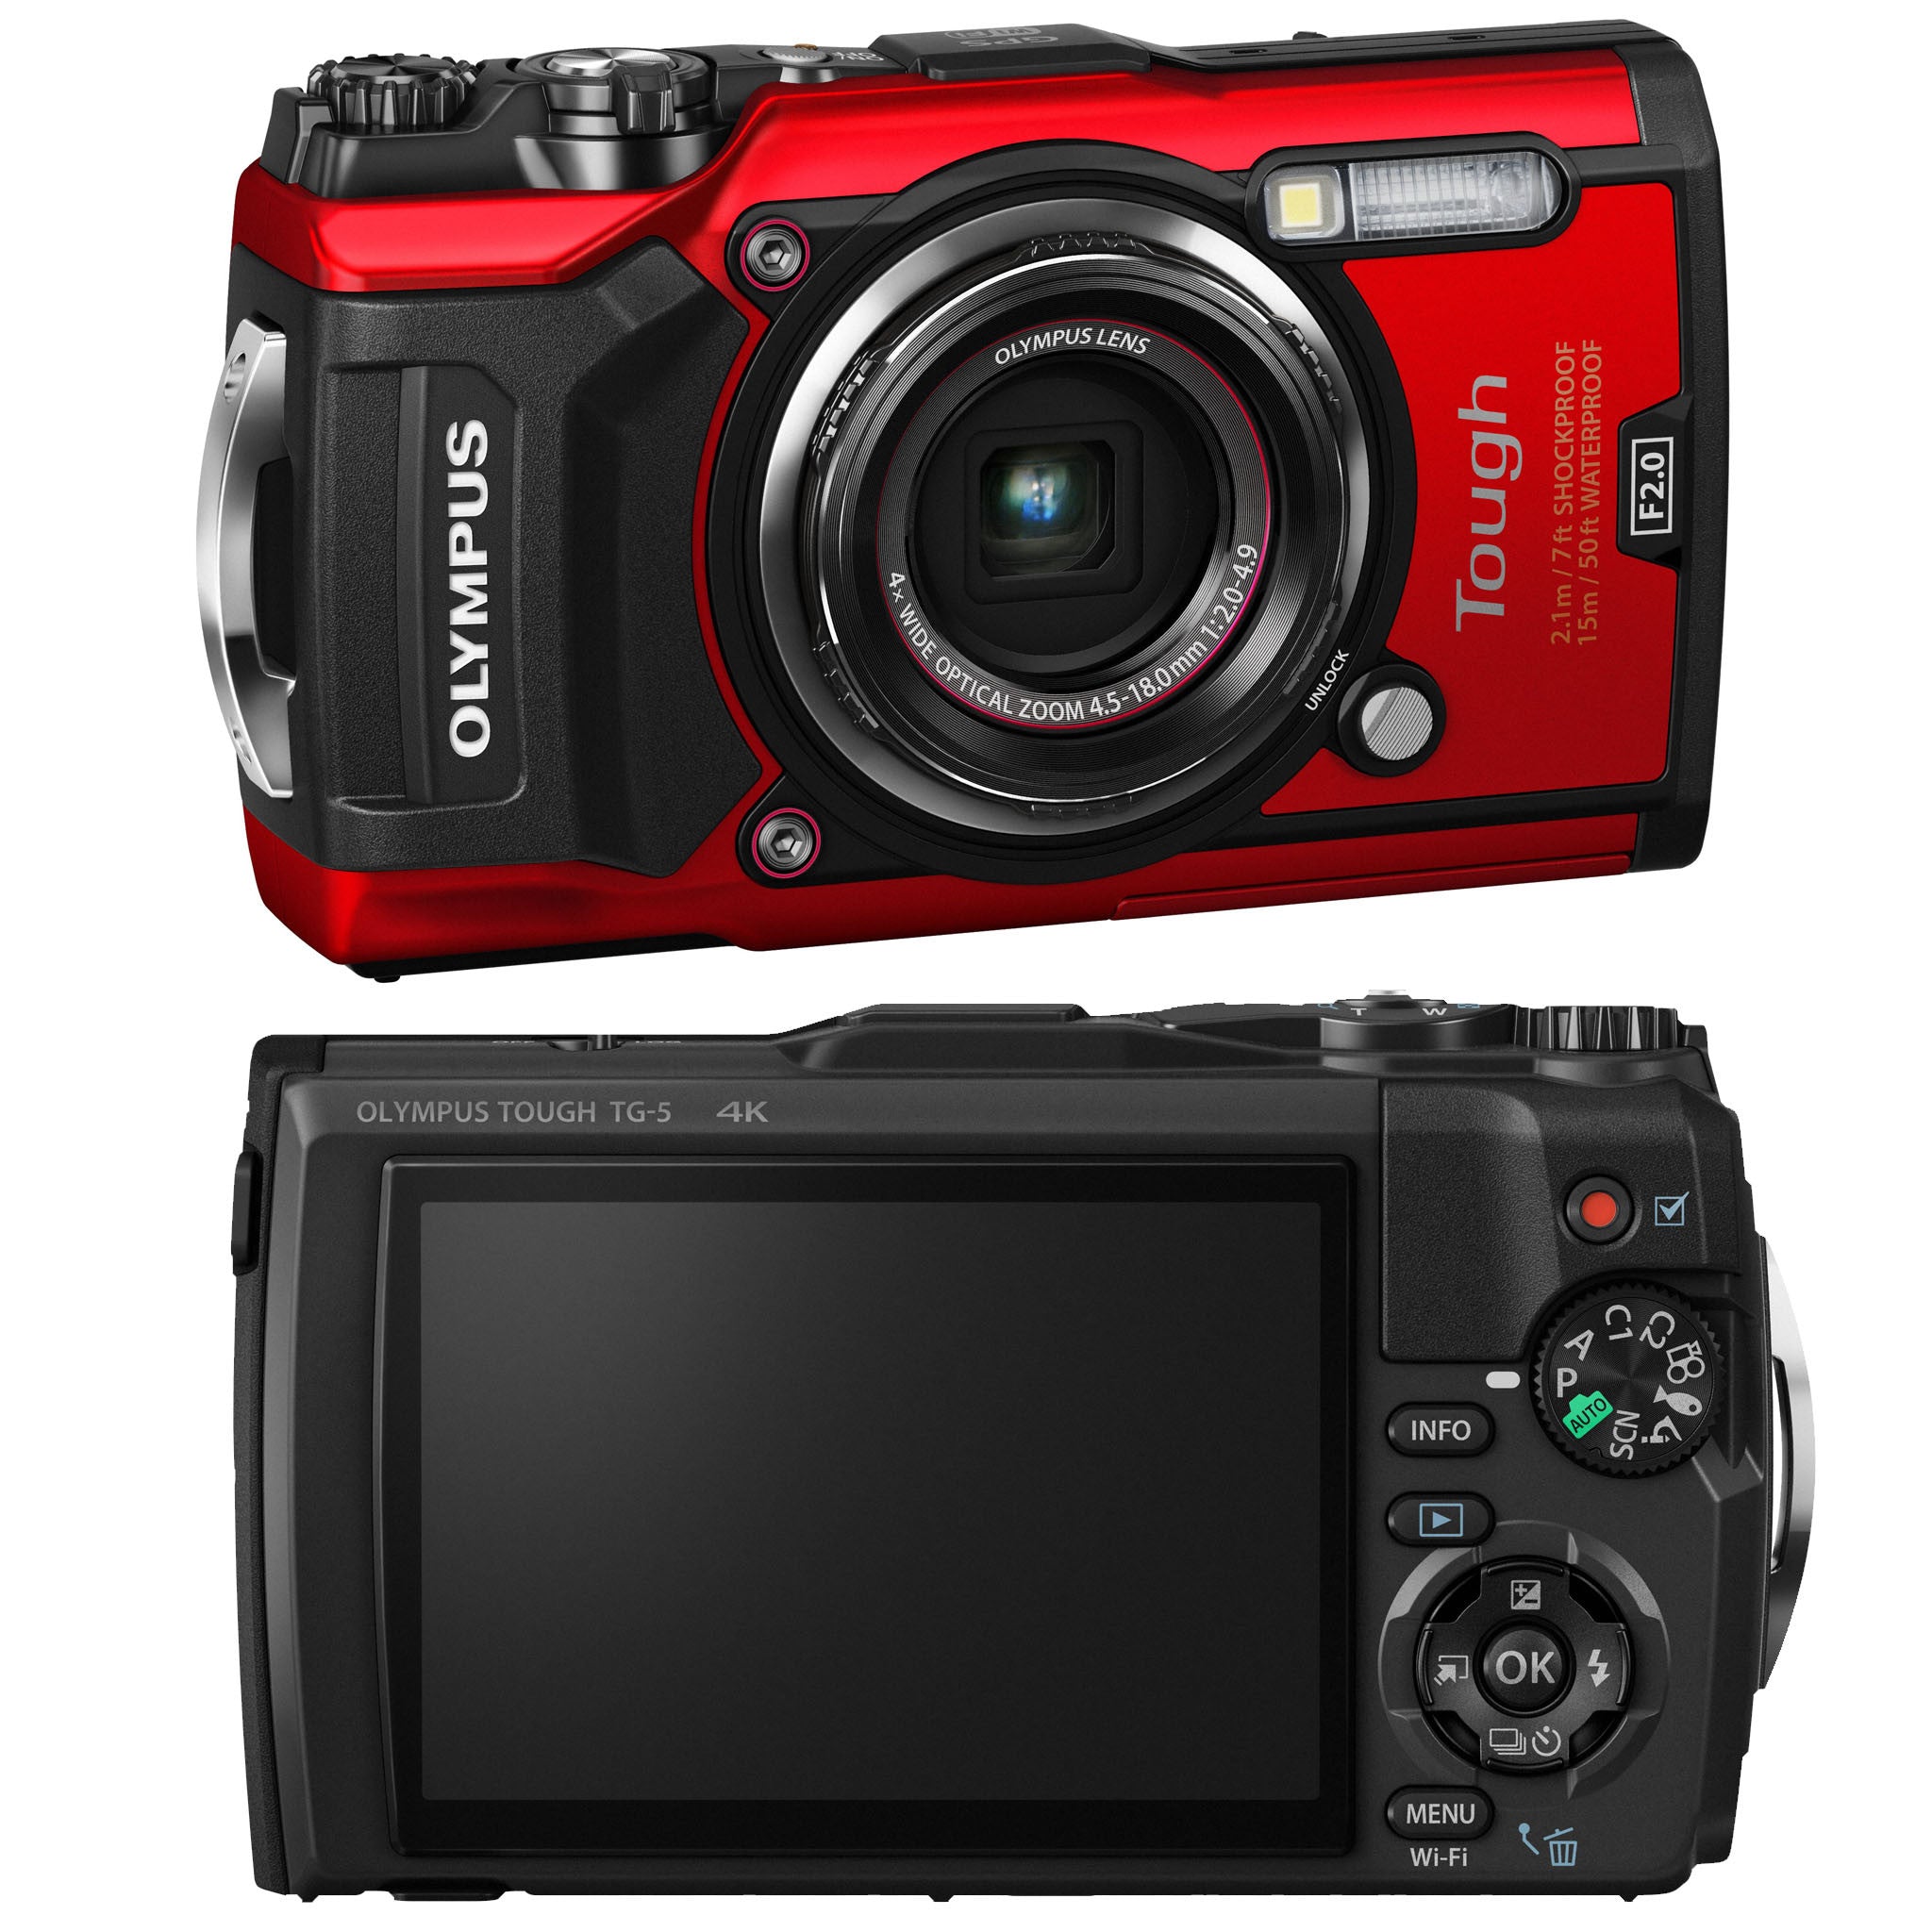 The Olympus Tough TG-5 — Conquer the Outdoors!